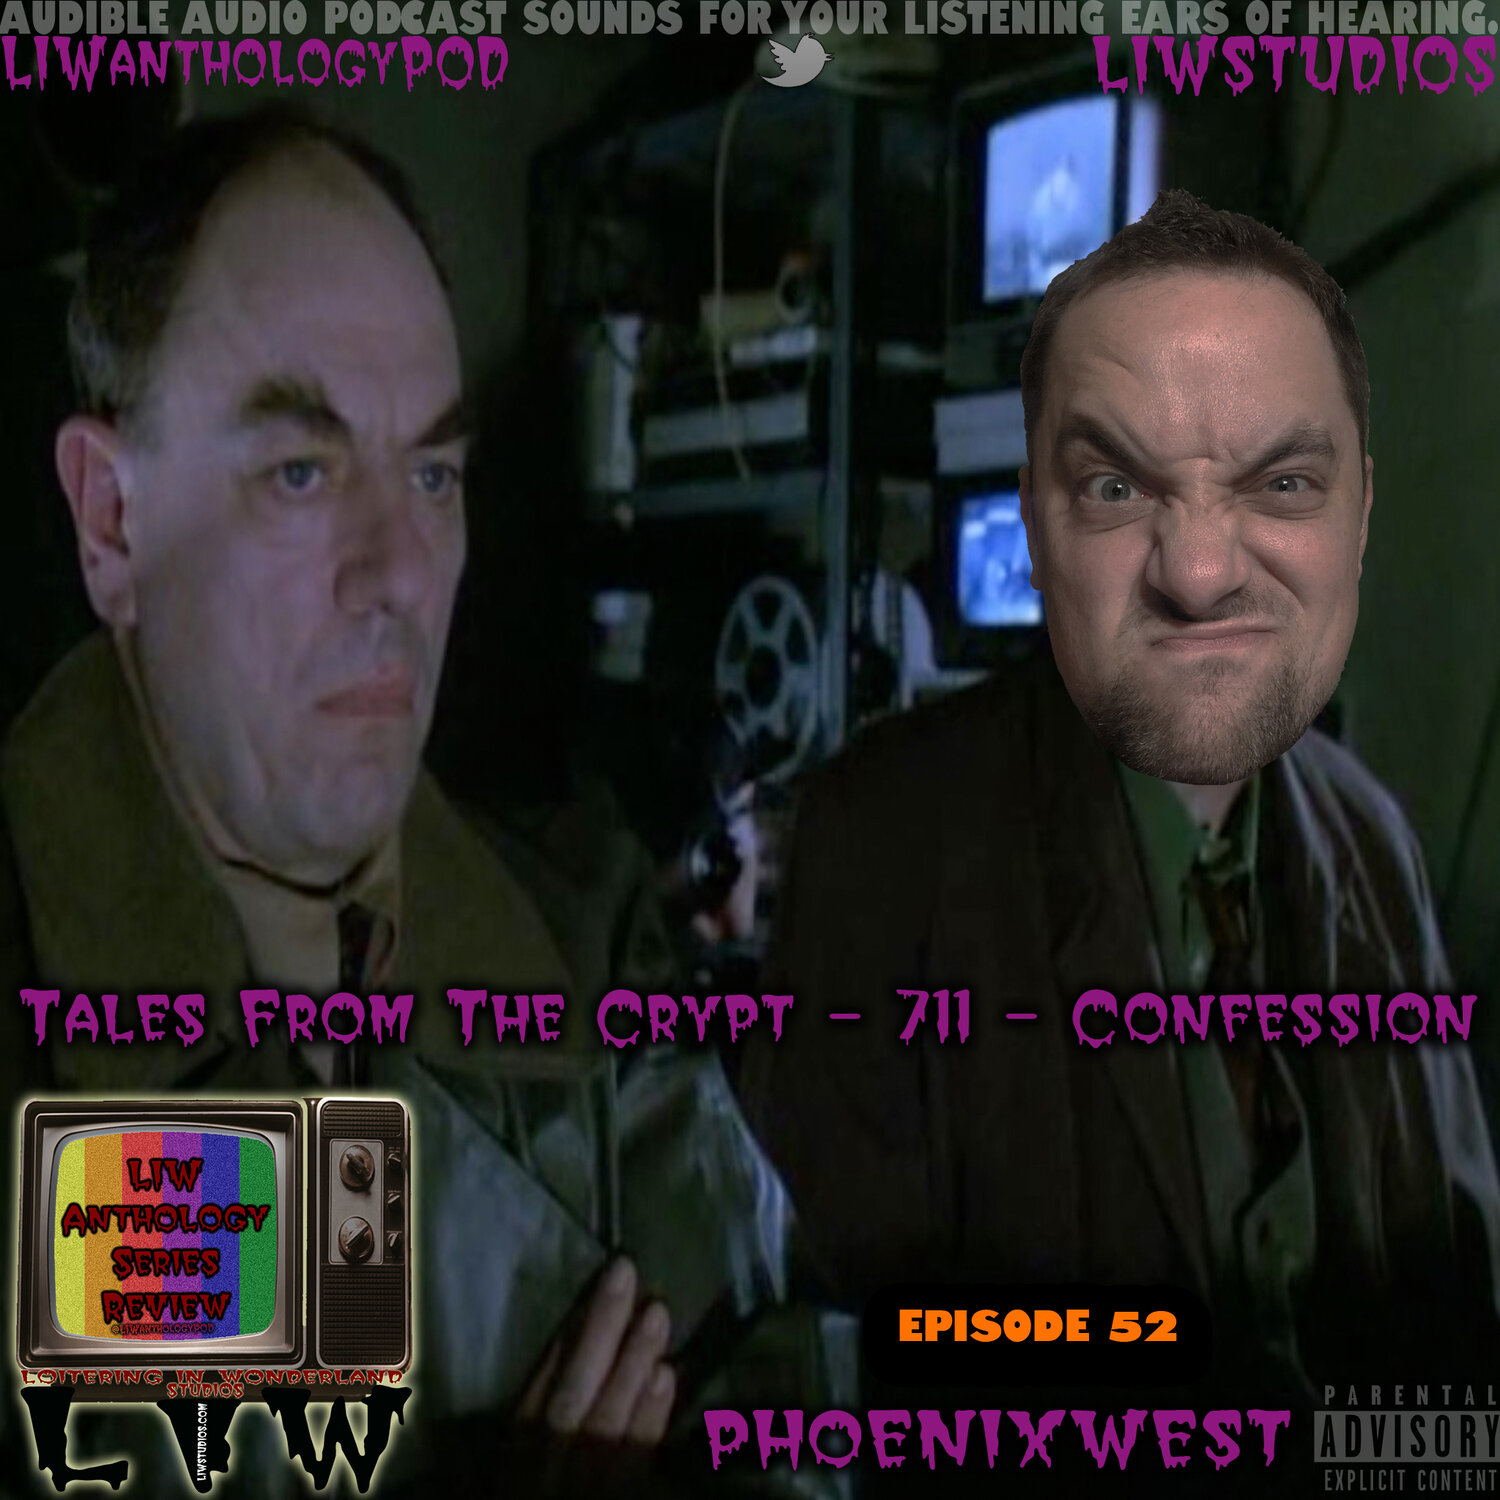 52: Tales From The Crypt - 711 - Confession